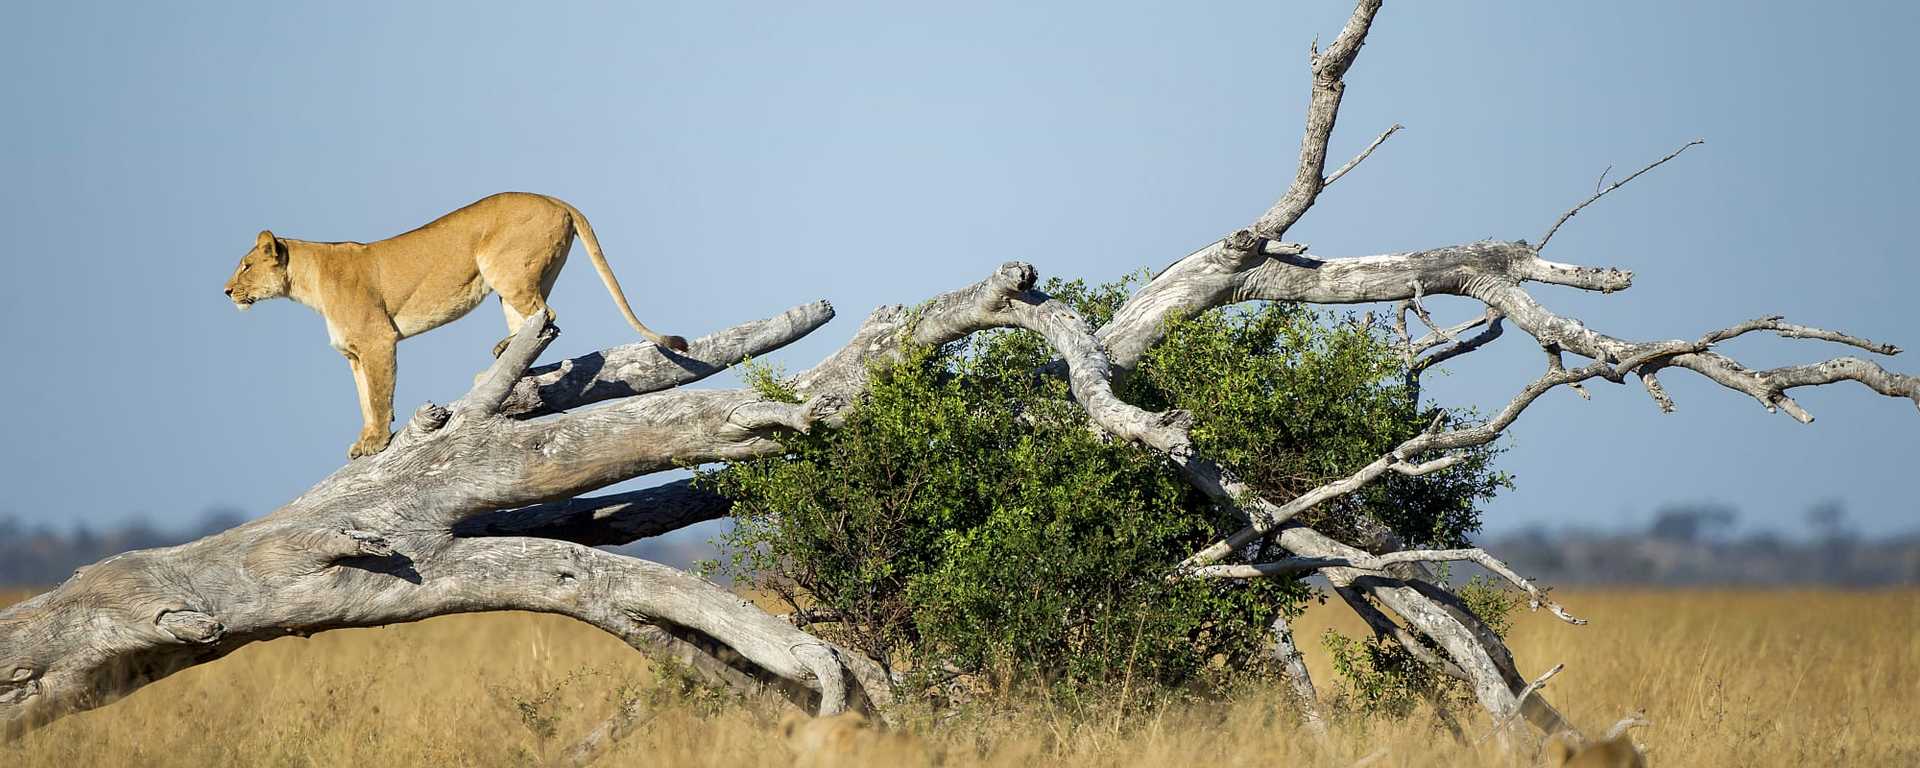 Lionesse on a tree in Chobe National Park, Botswana